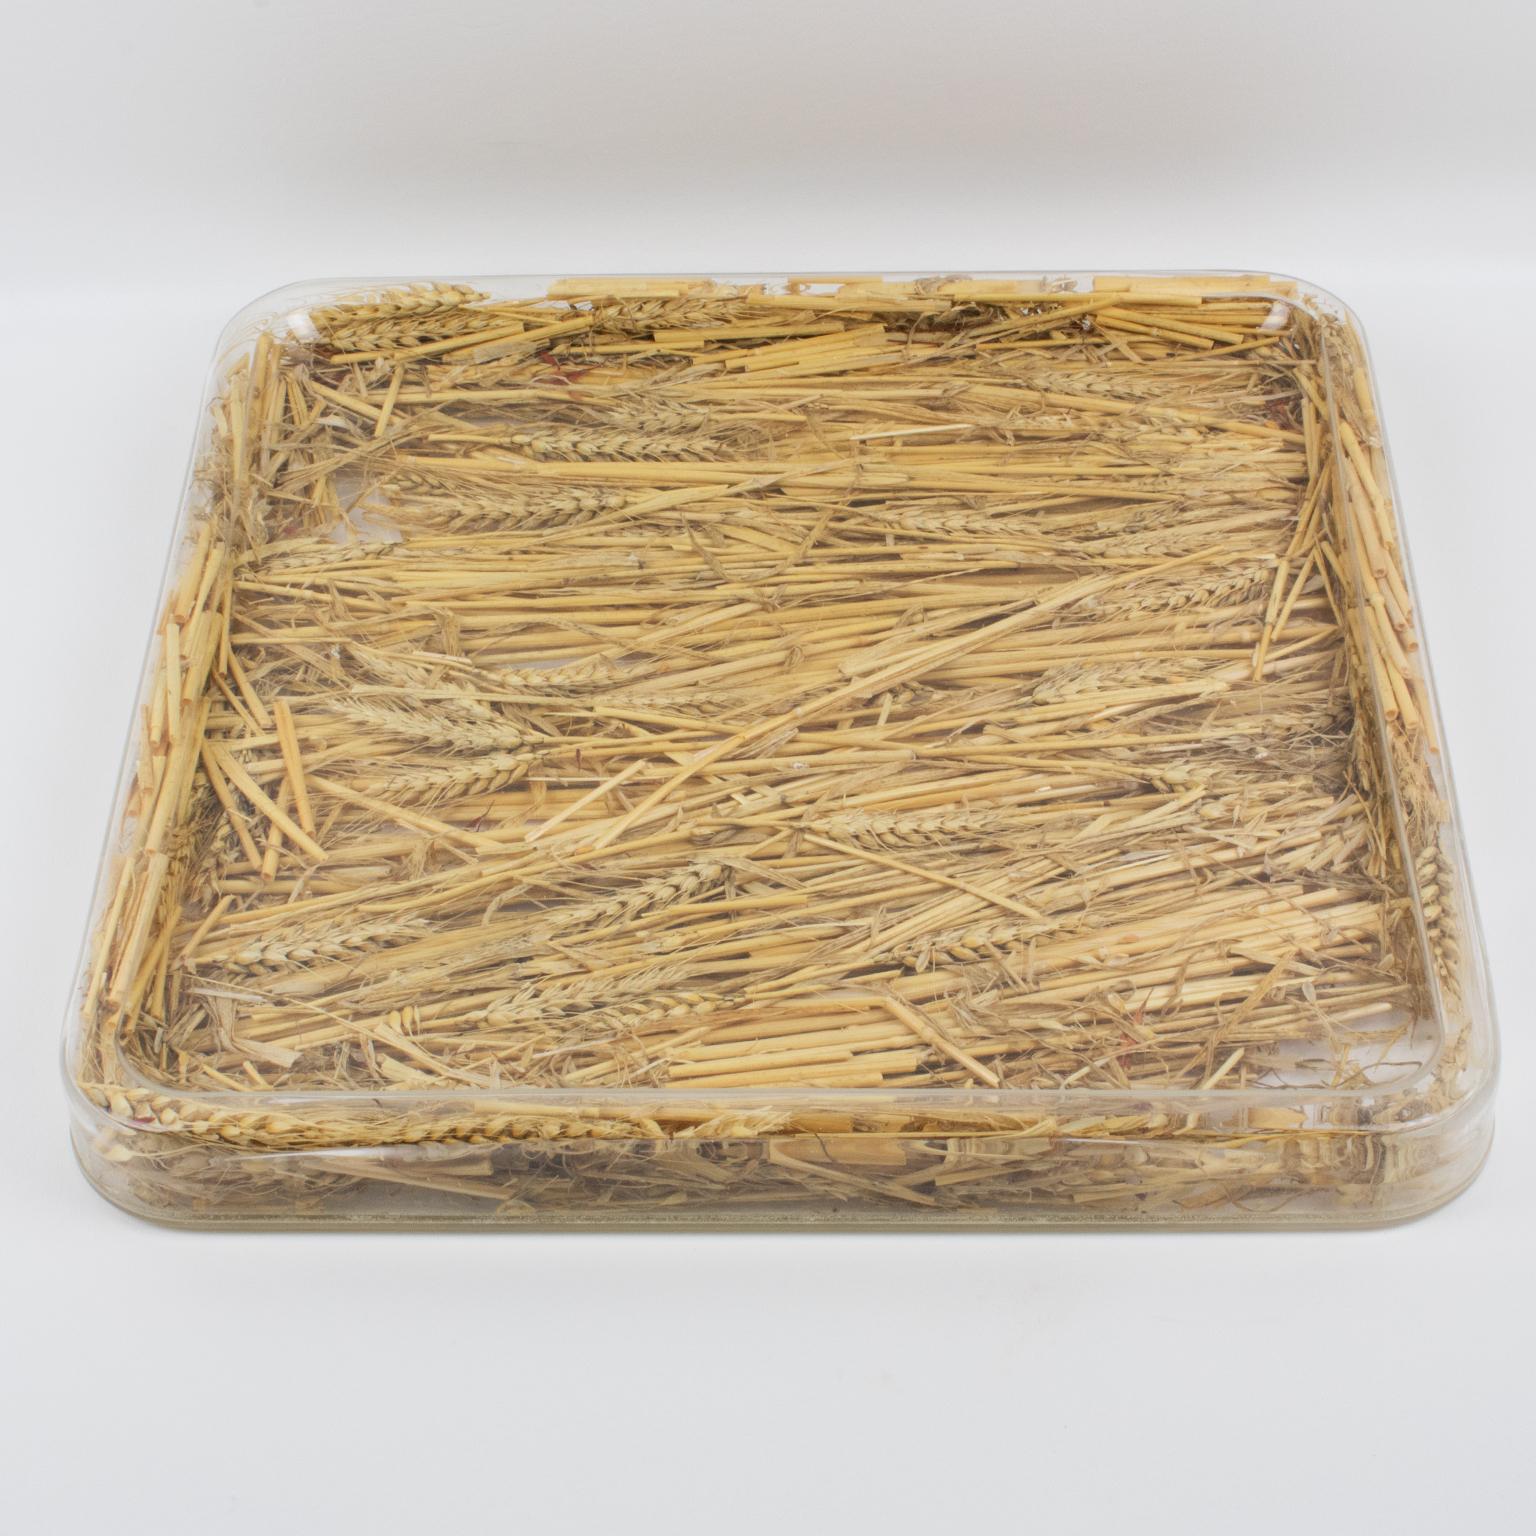 This is a very special and unique serving tray, designed by Christian Dior in the 1970s for his Home Collection. This board or platter has a rectangular shape with raised edges. Made of clear Lucite or plexiglass with real wheat encased inside the